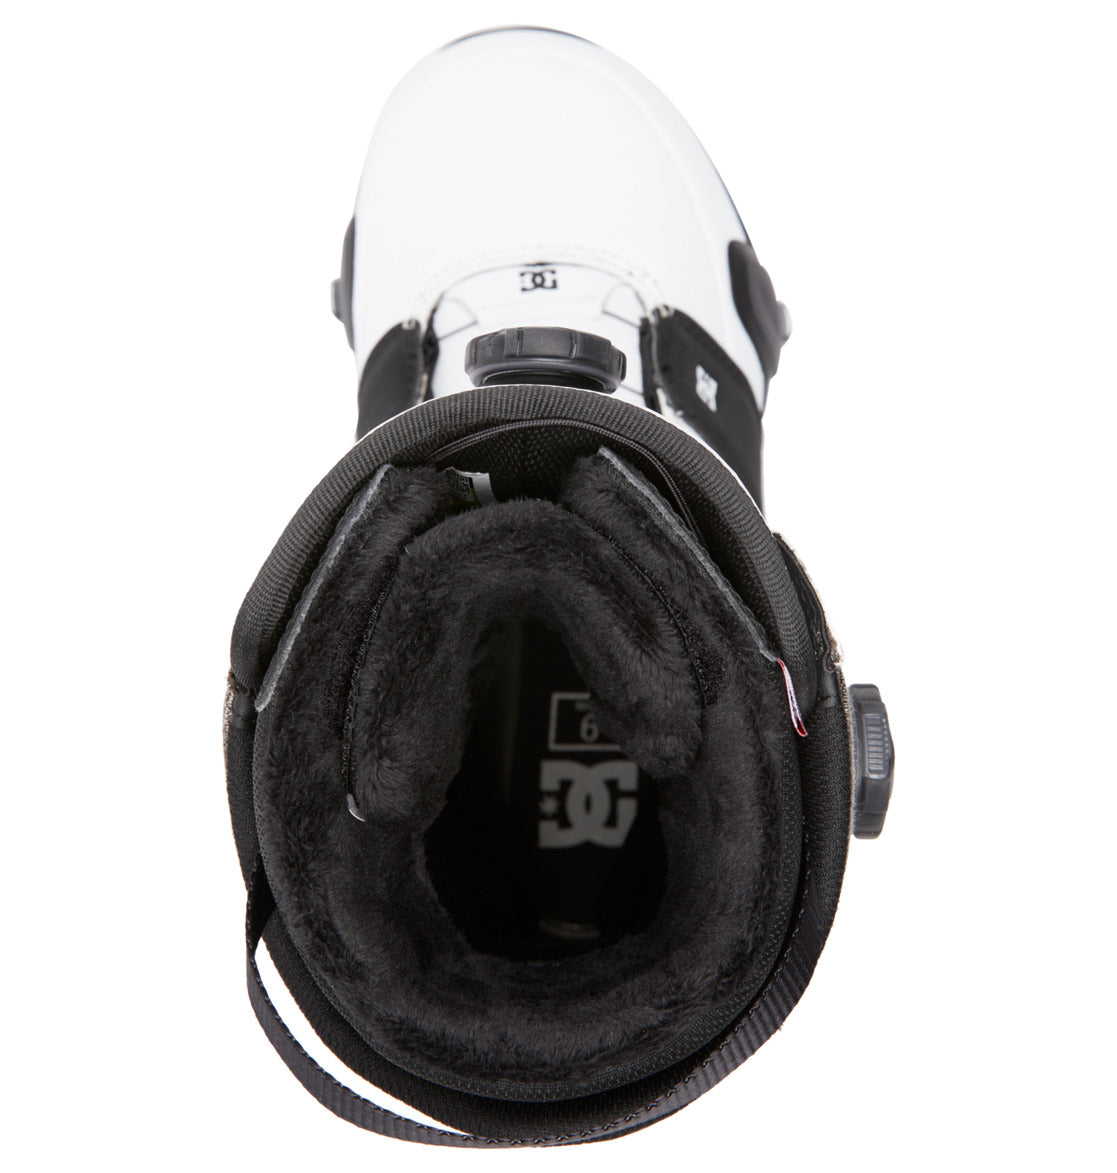 Men's Judge Step On BOA® Snowboard Boots - DC Shoes